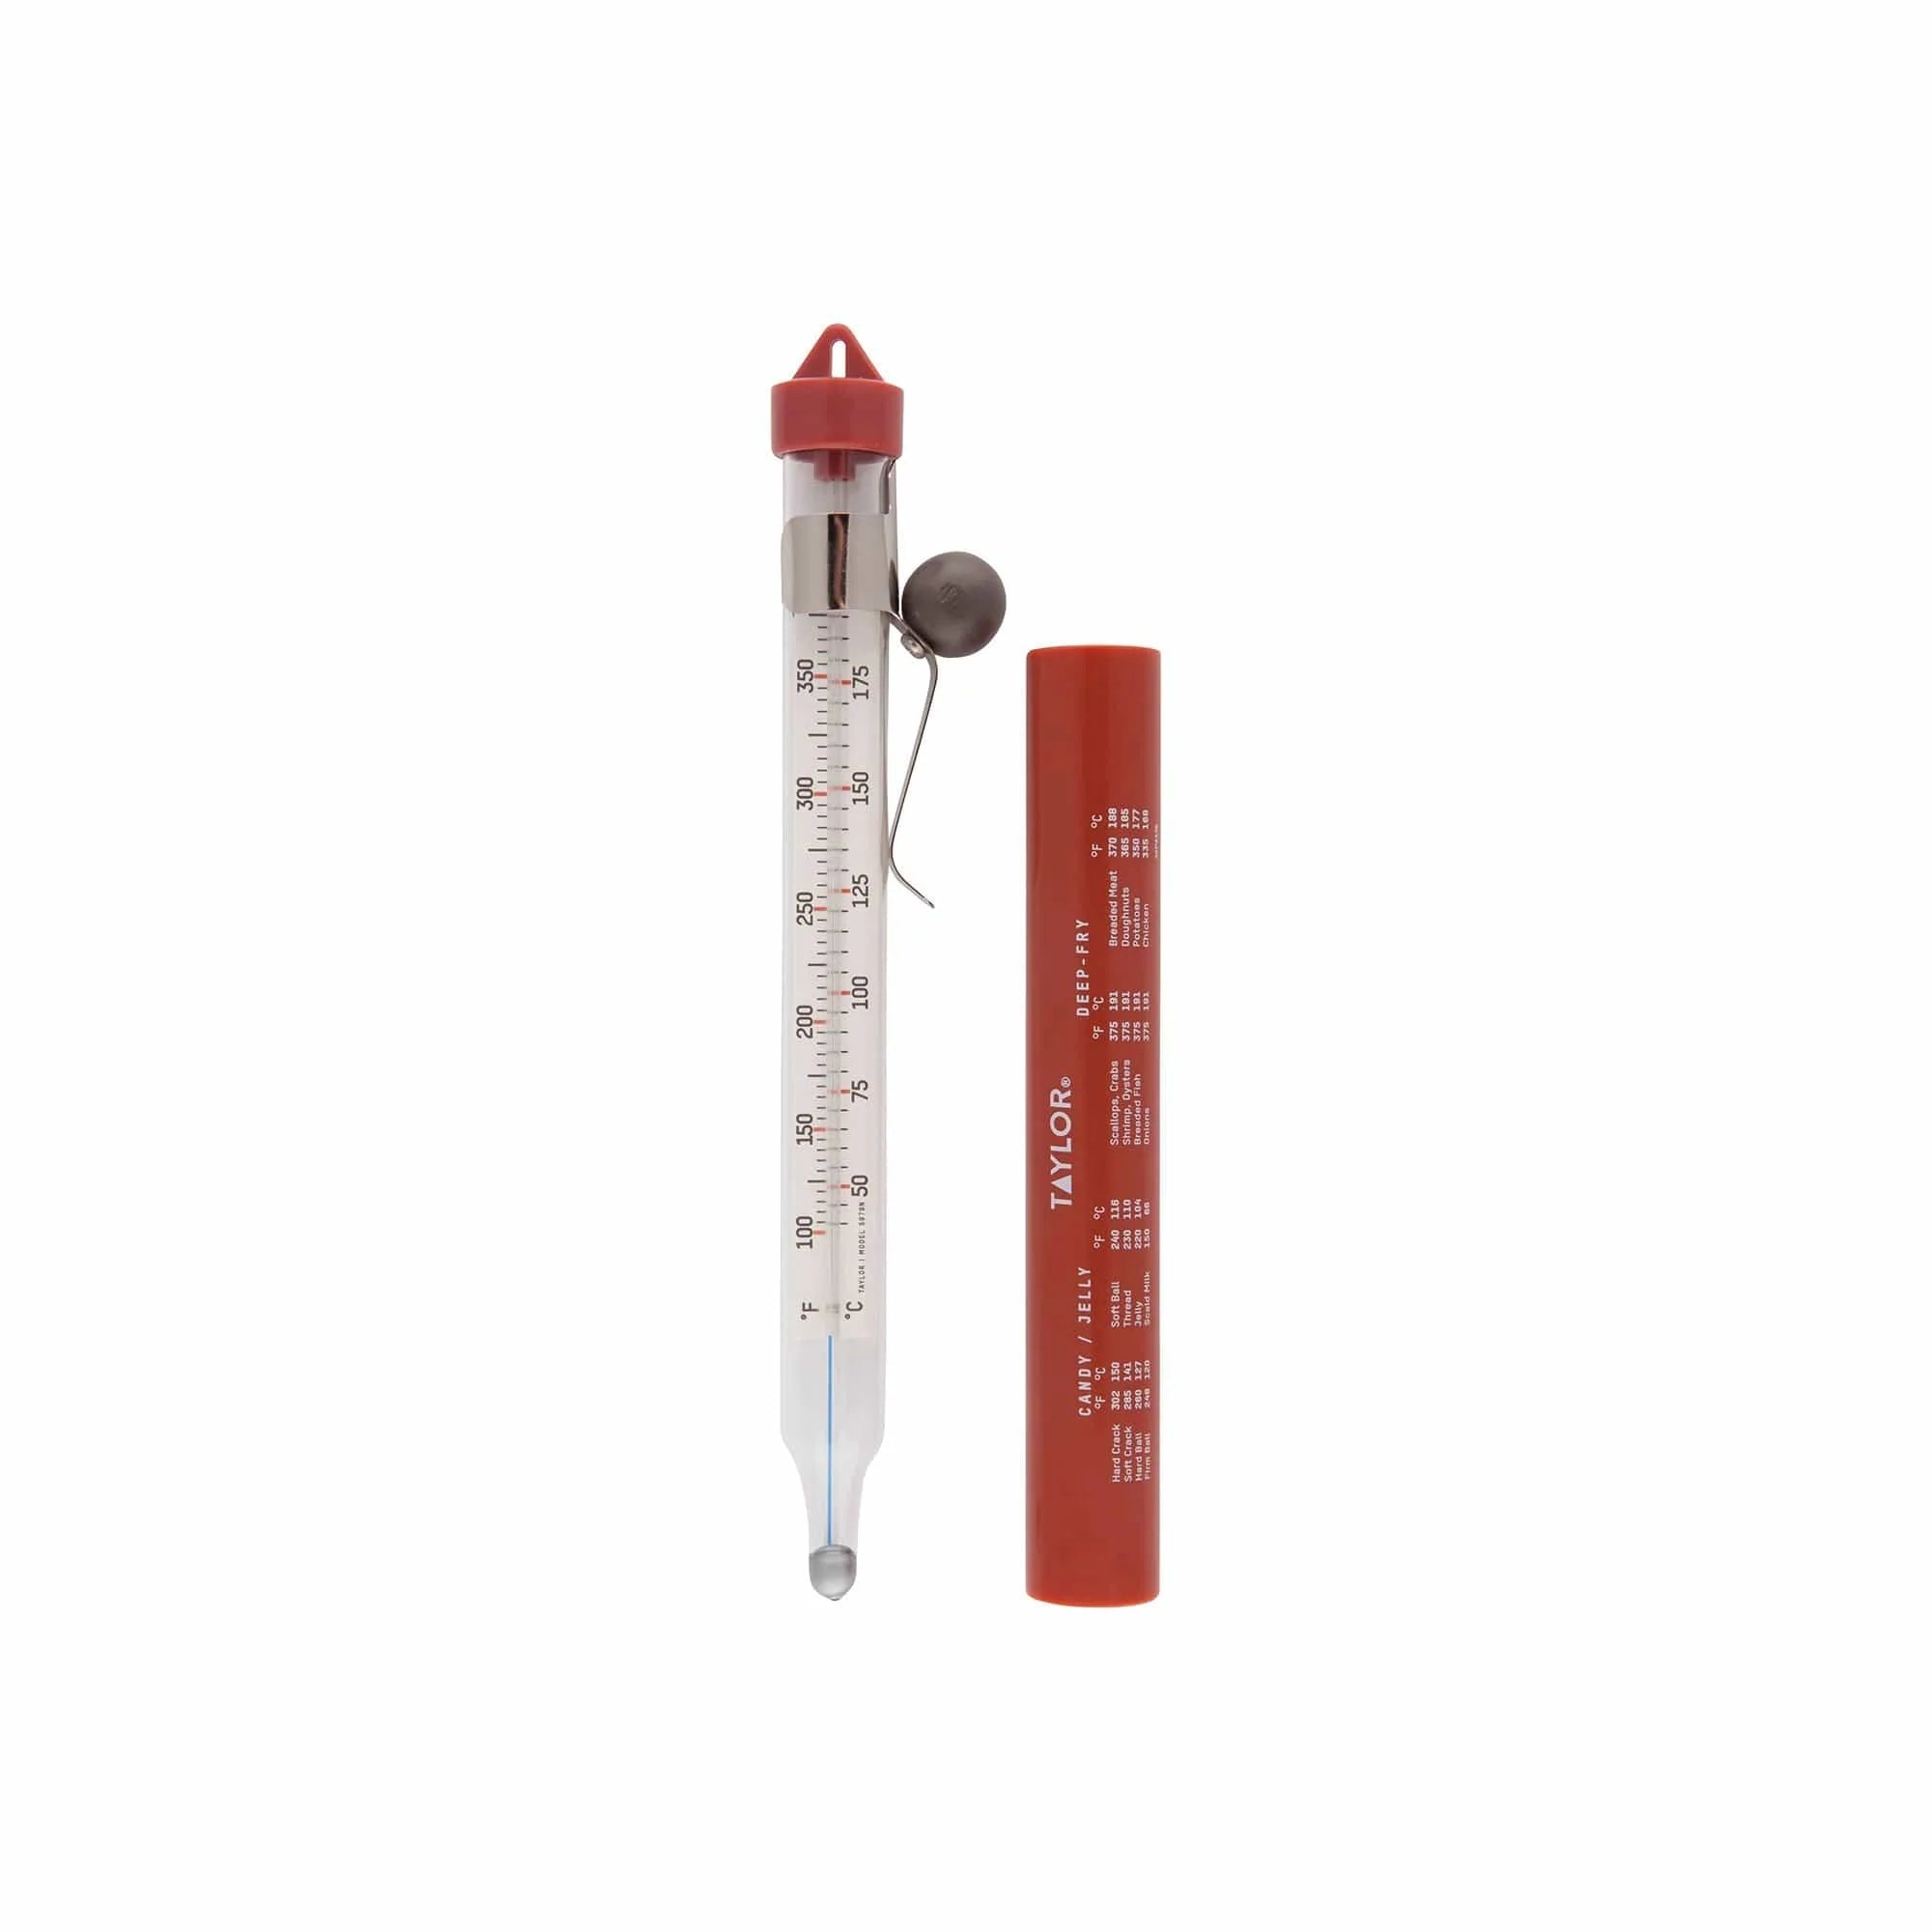 Taylor 5911N Classic Series Dial Candy / Deep Fry Analog Dial Thermometer  with 5 Stem